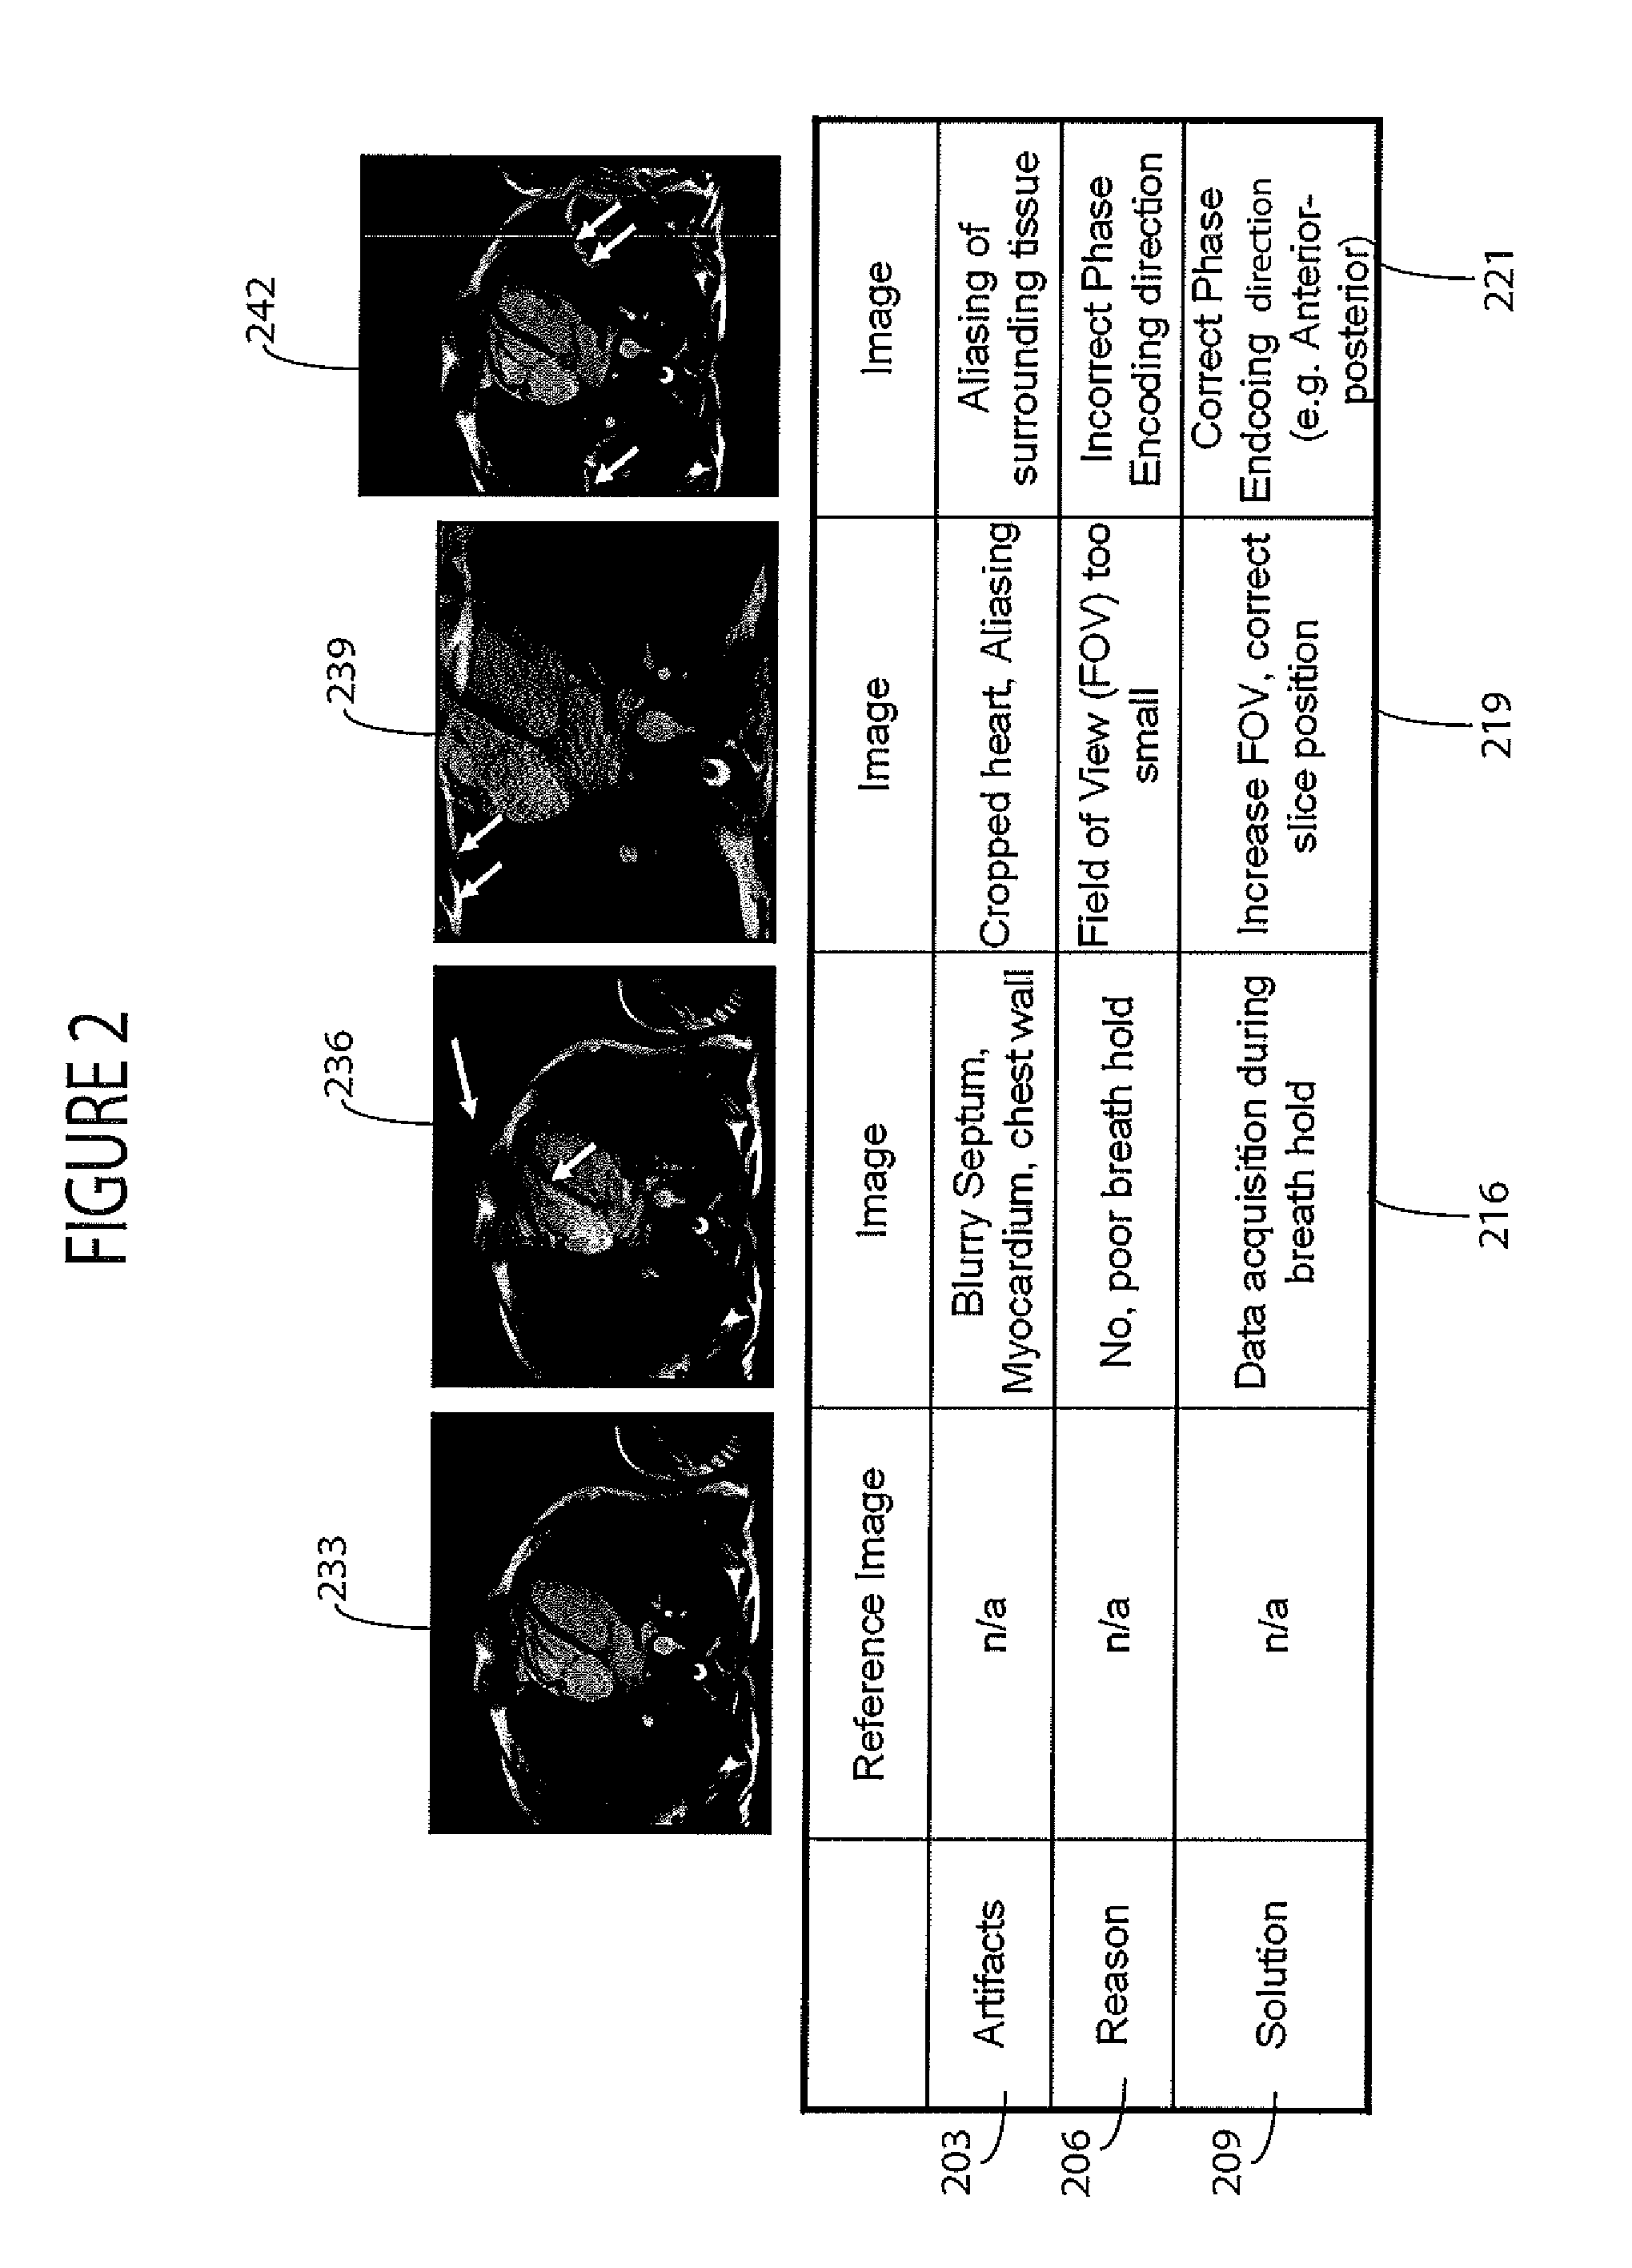 System for Dynamically Improving Medical Image Acquisition Quality